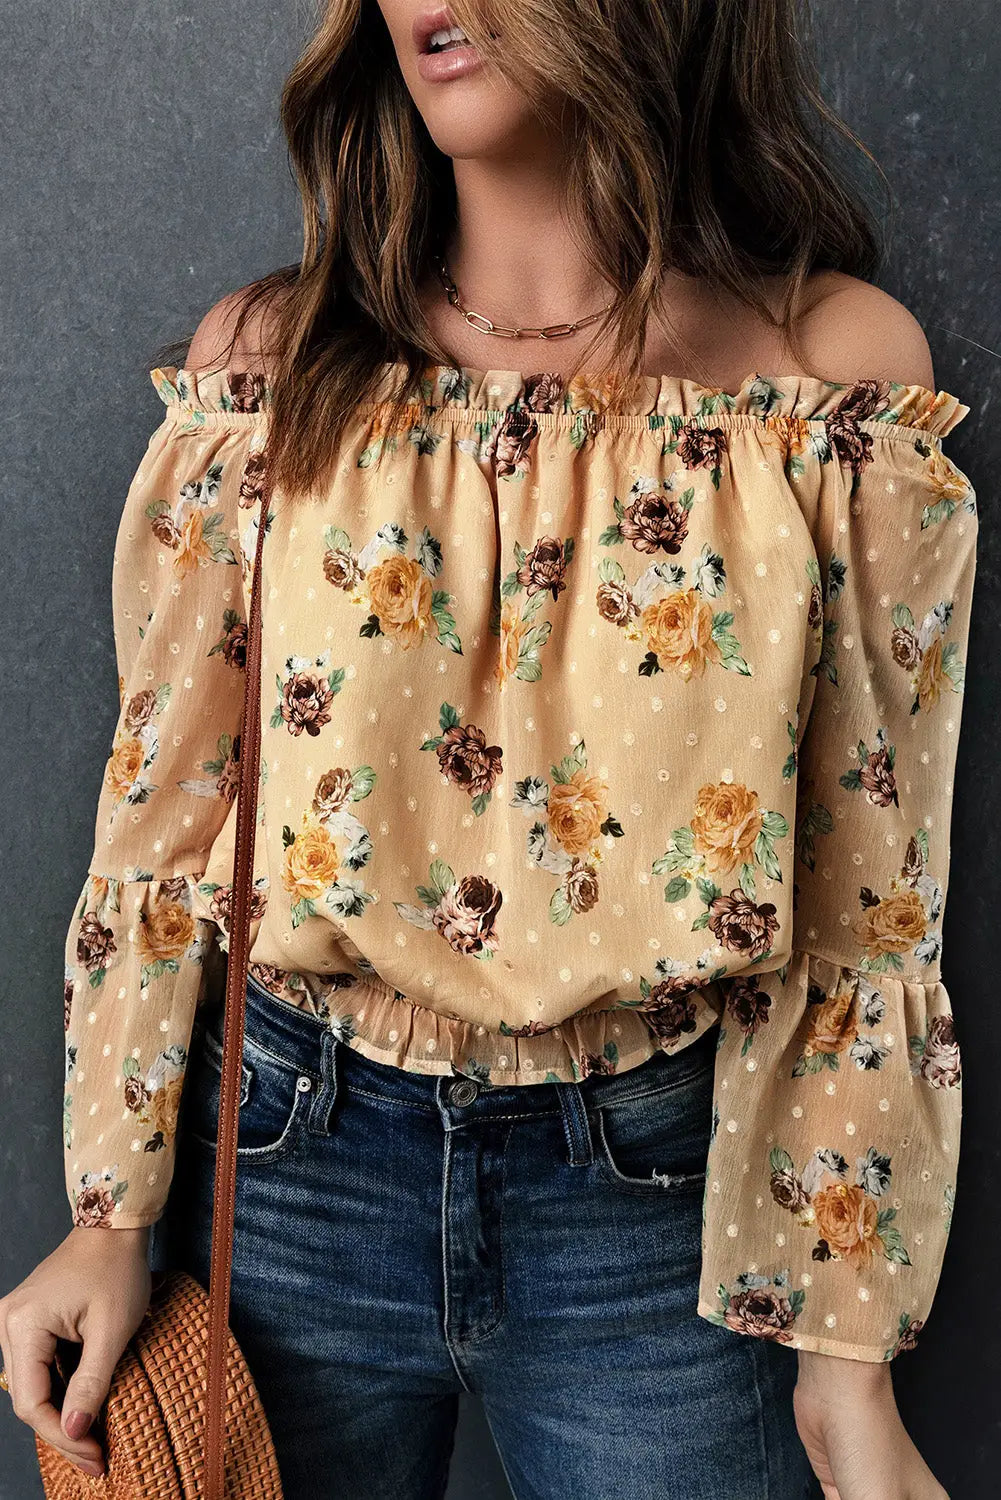 Yellow bell sleeves floral crop top - s 100% polyester tops